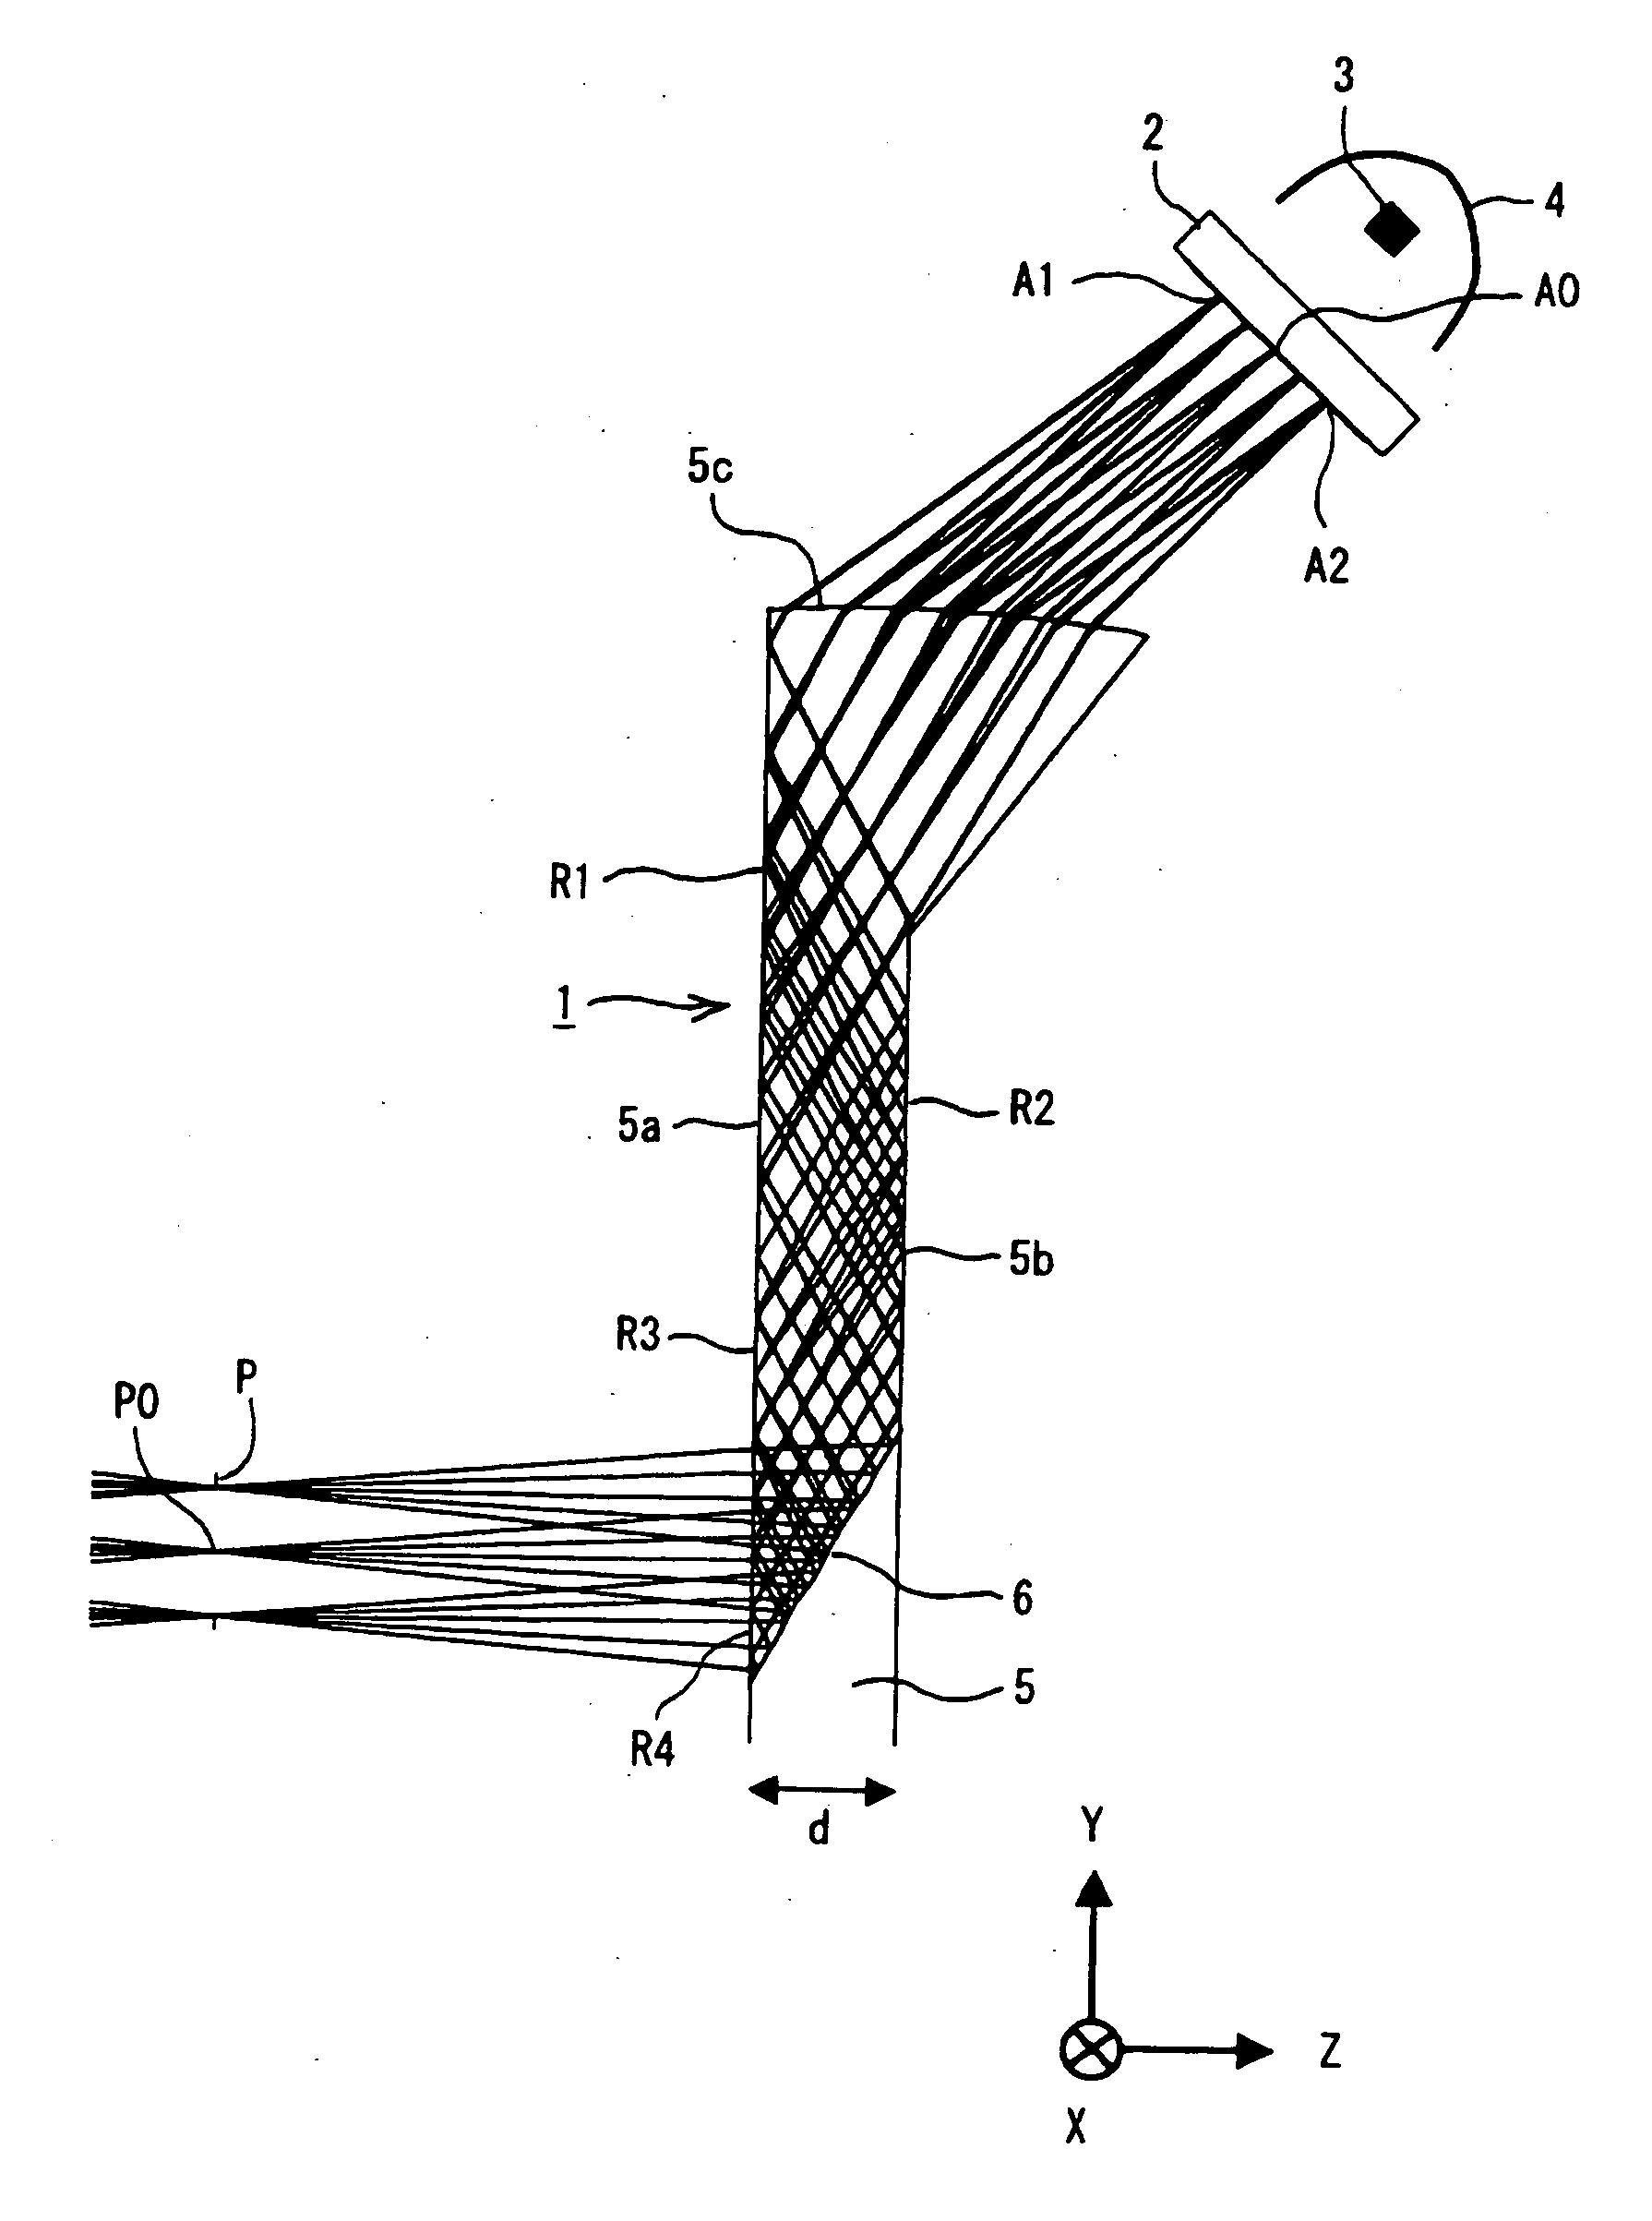 Image combiner and image display unit